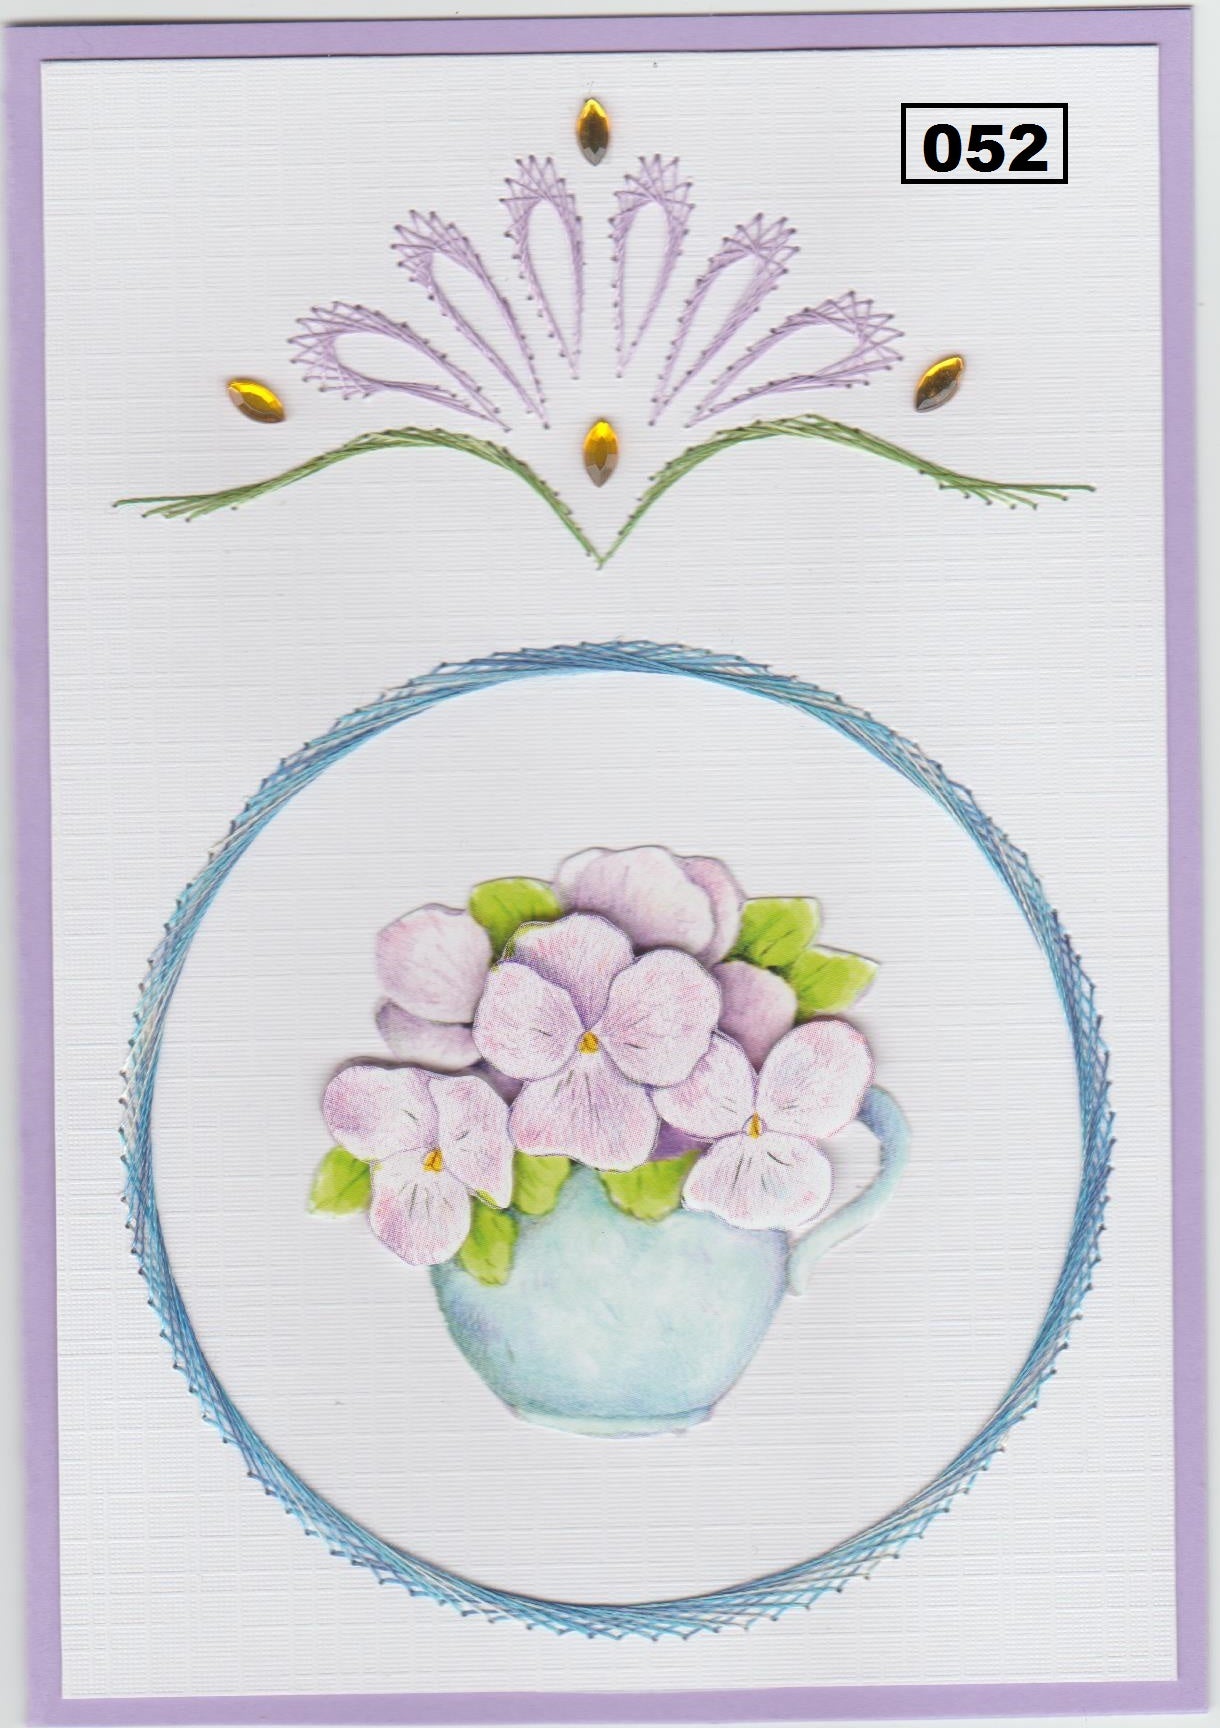 Laura's Design Digital Embroidery Pattern - Floral Shape